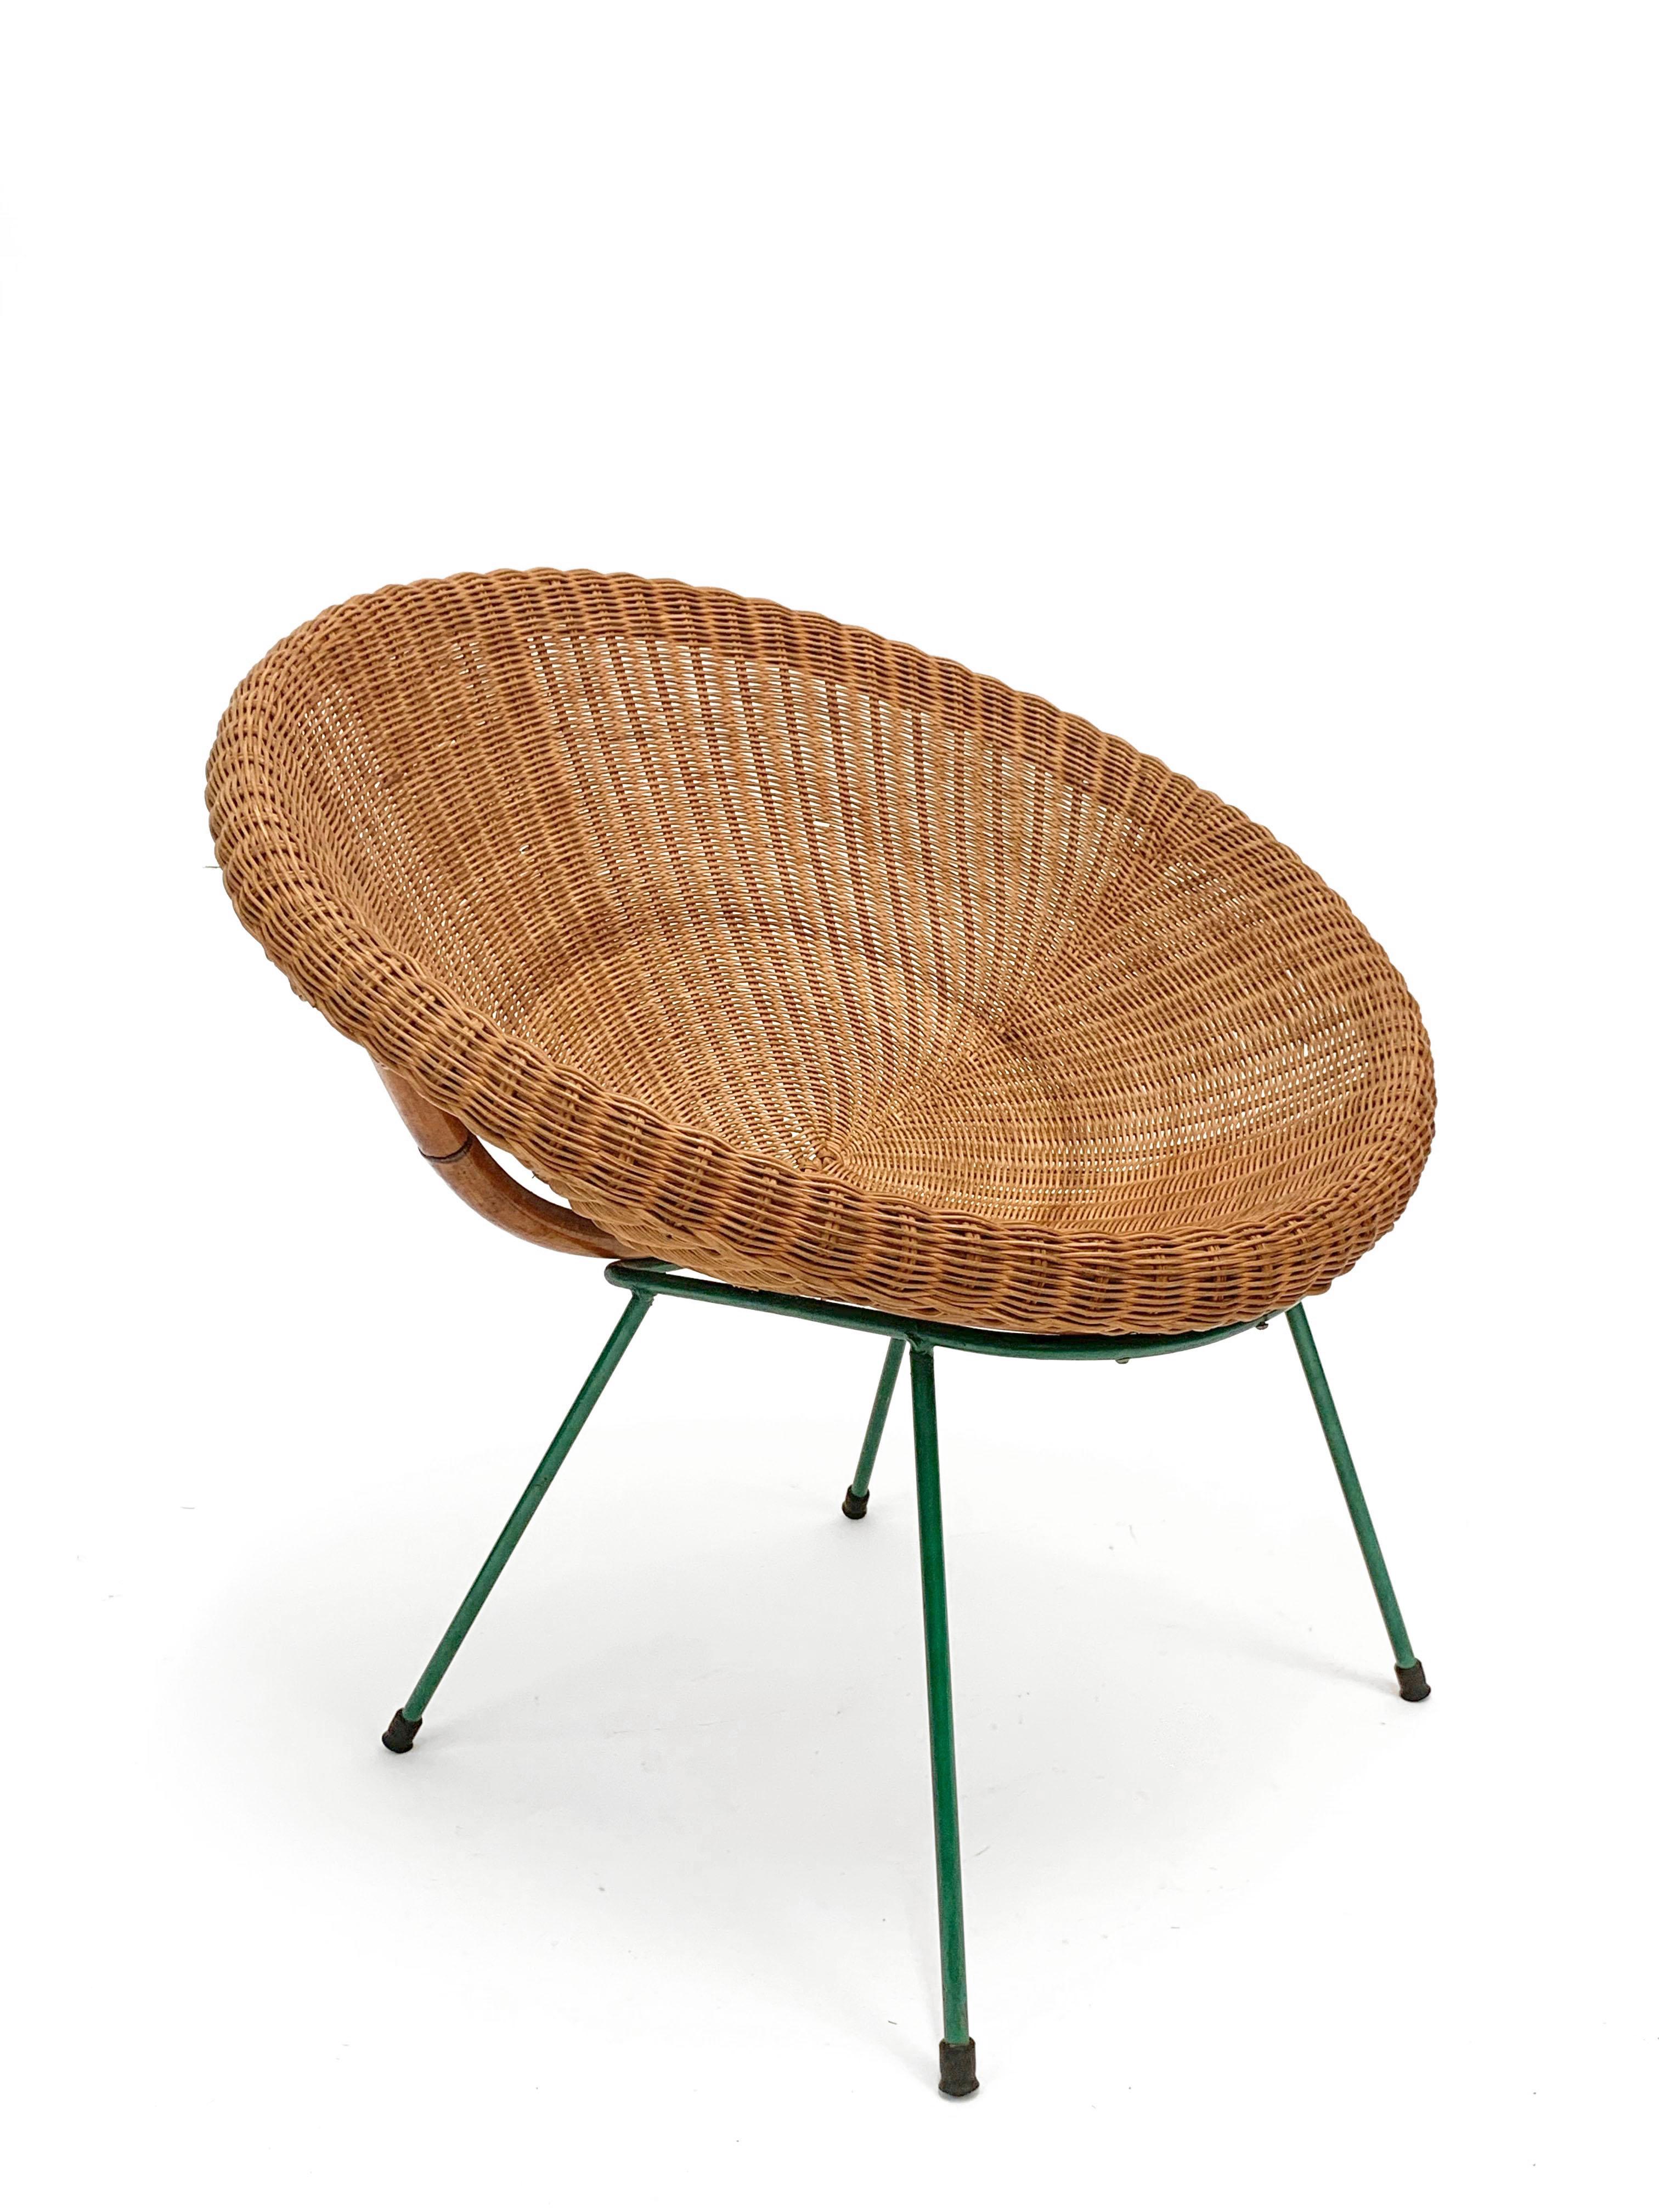 Iron Midcentury Italian Rattan and Bamboo Shell Armchair with Green Metal Legs, 1950s